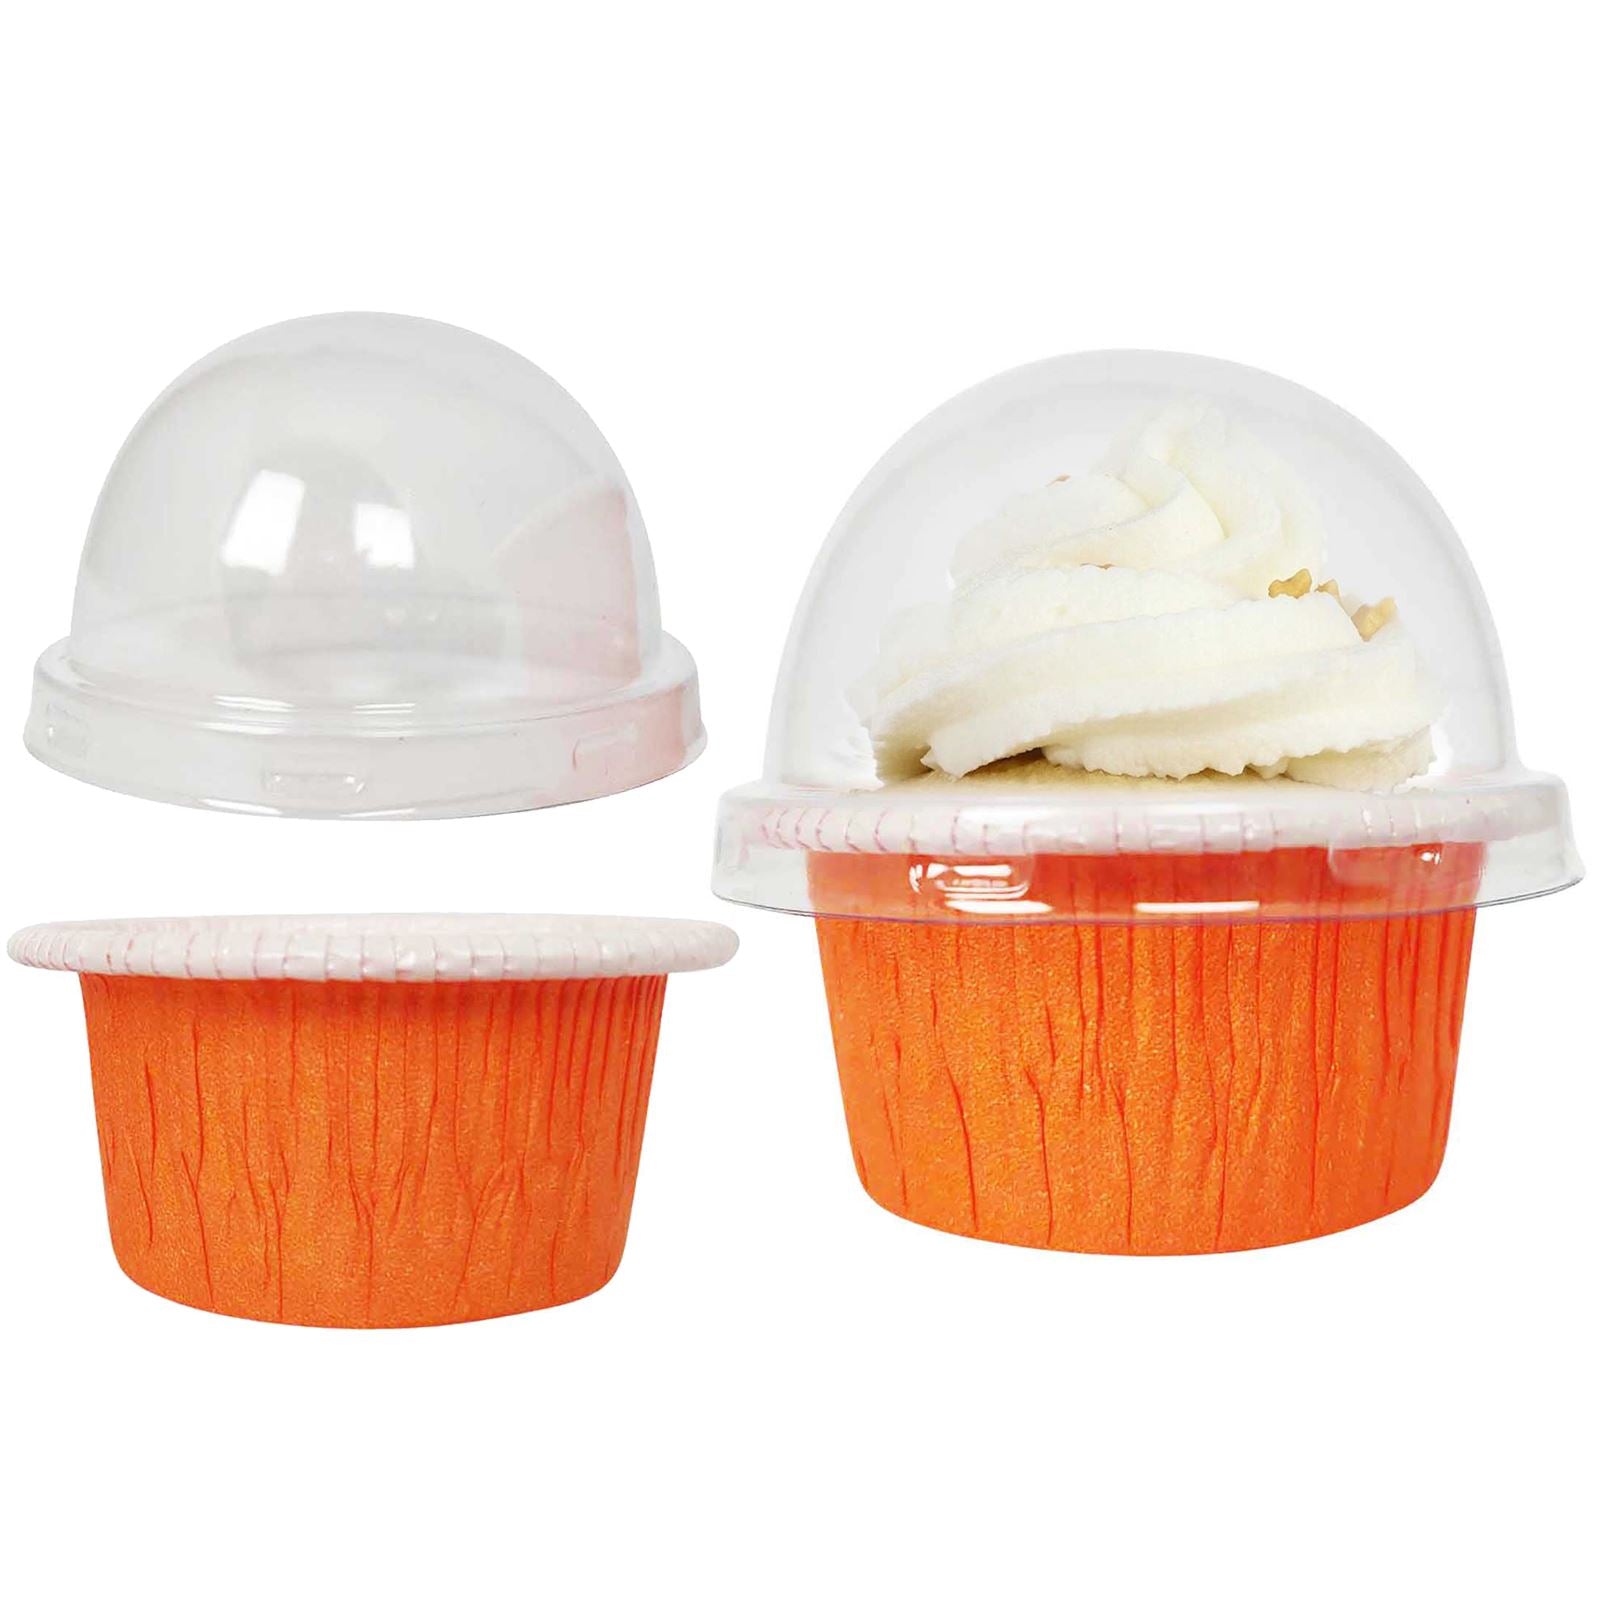 Cupcake Cases with Clear Dome Lids